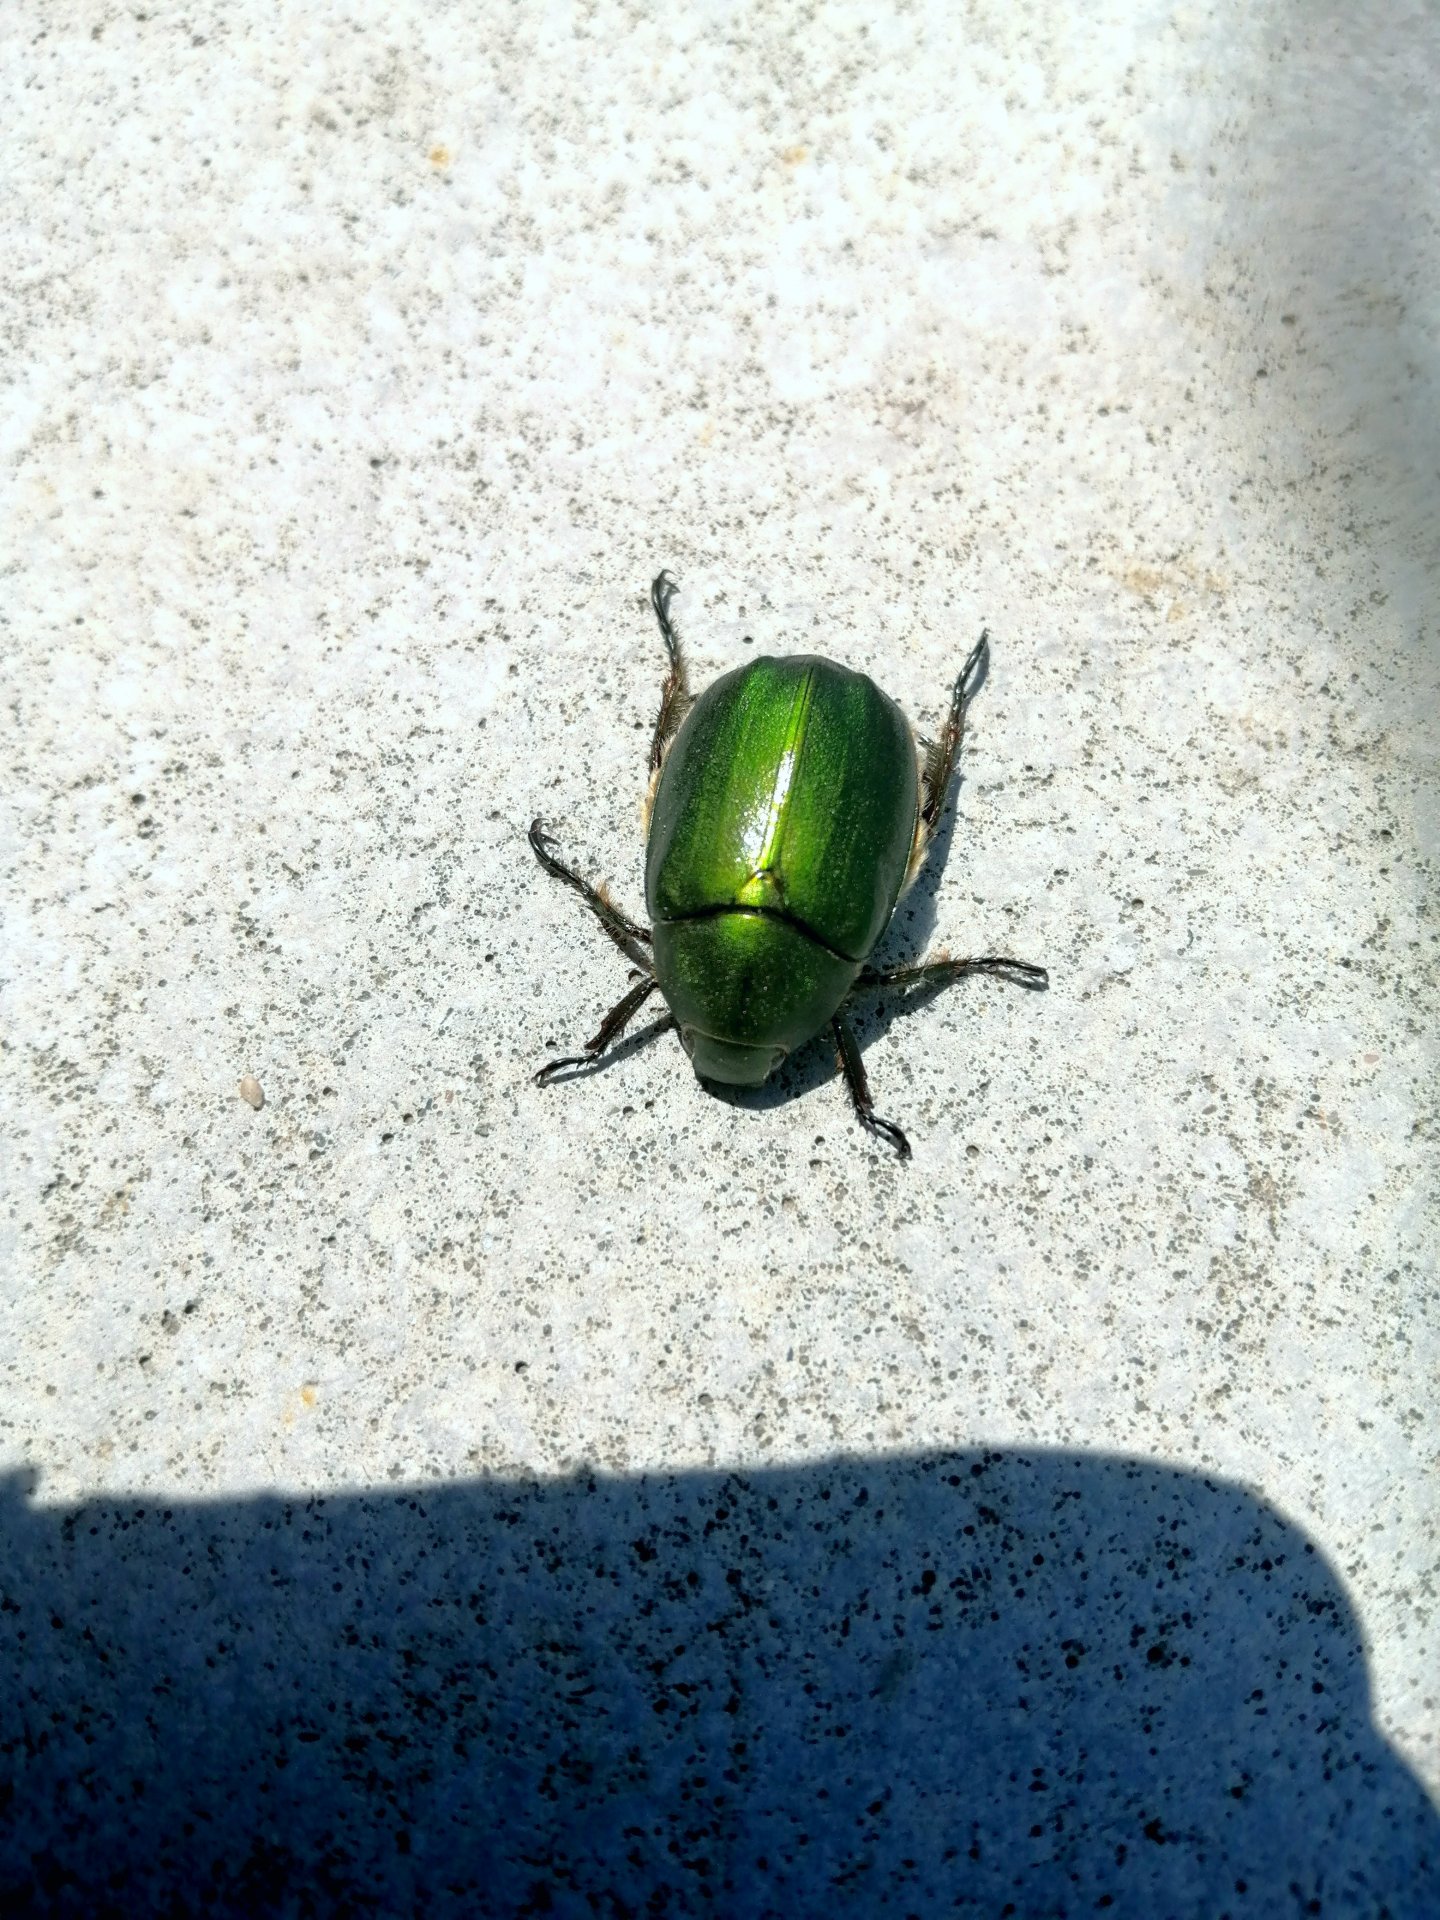 Not sure about what kind of beetle.